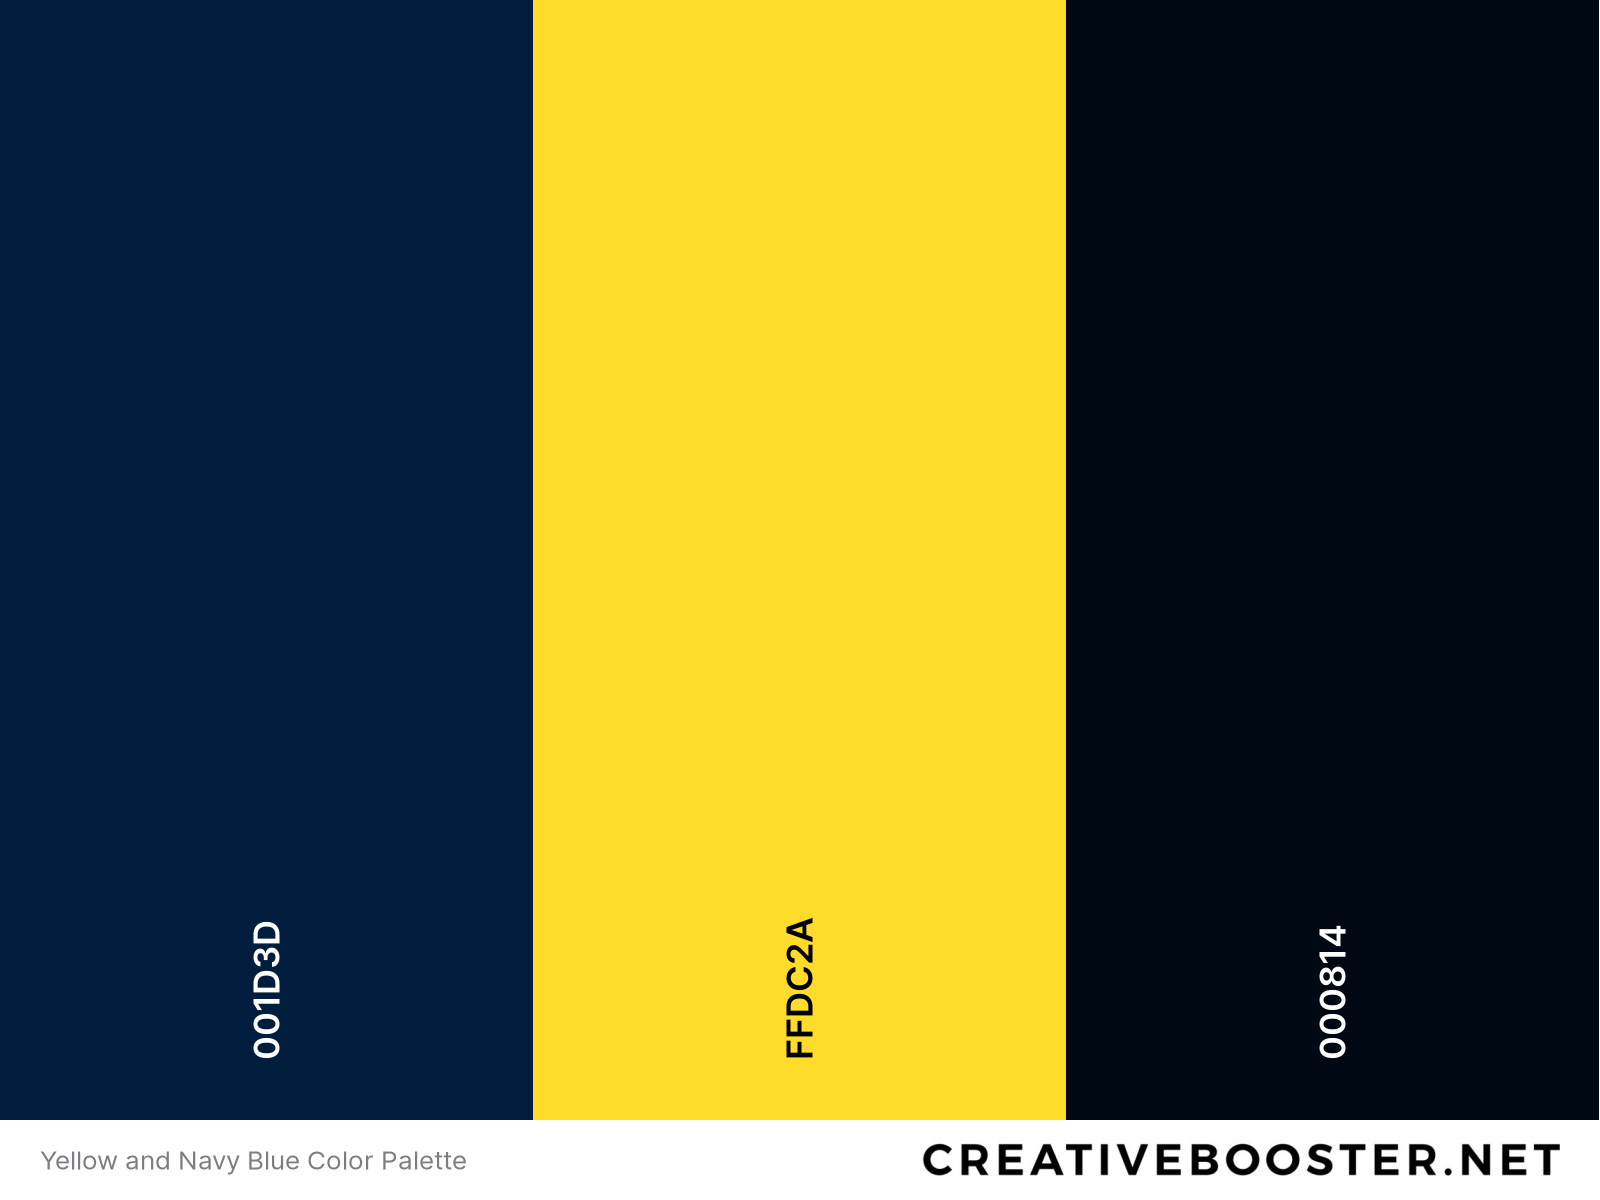 Yellow and Navy Blue Color Palette